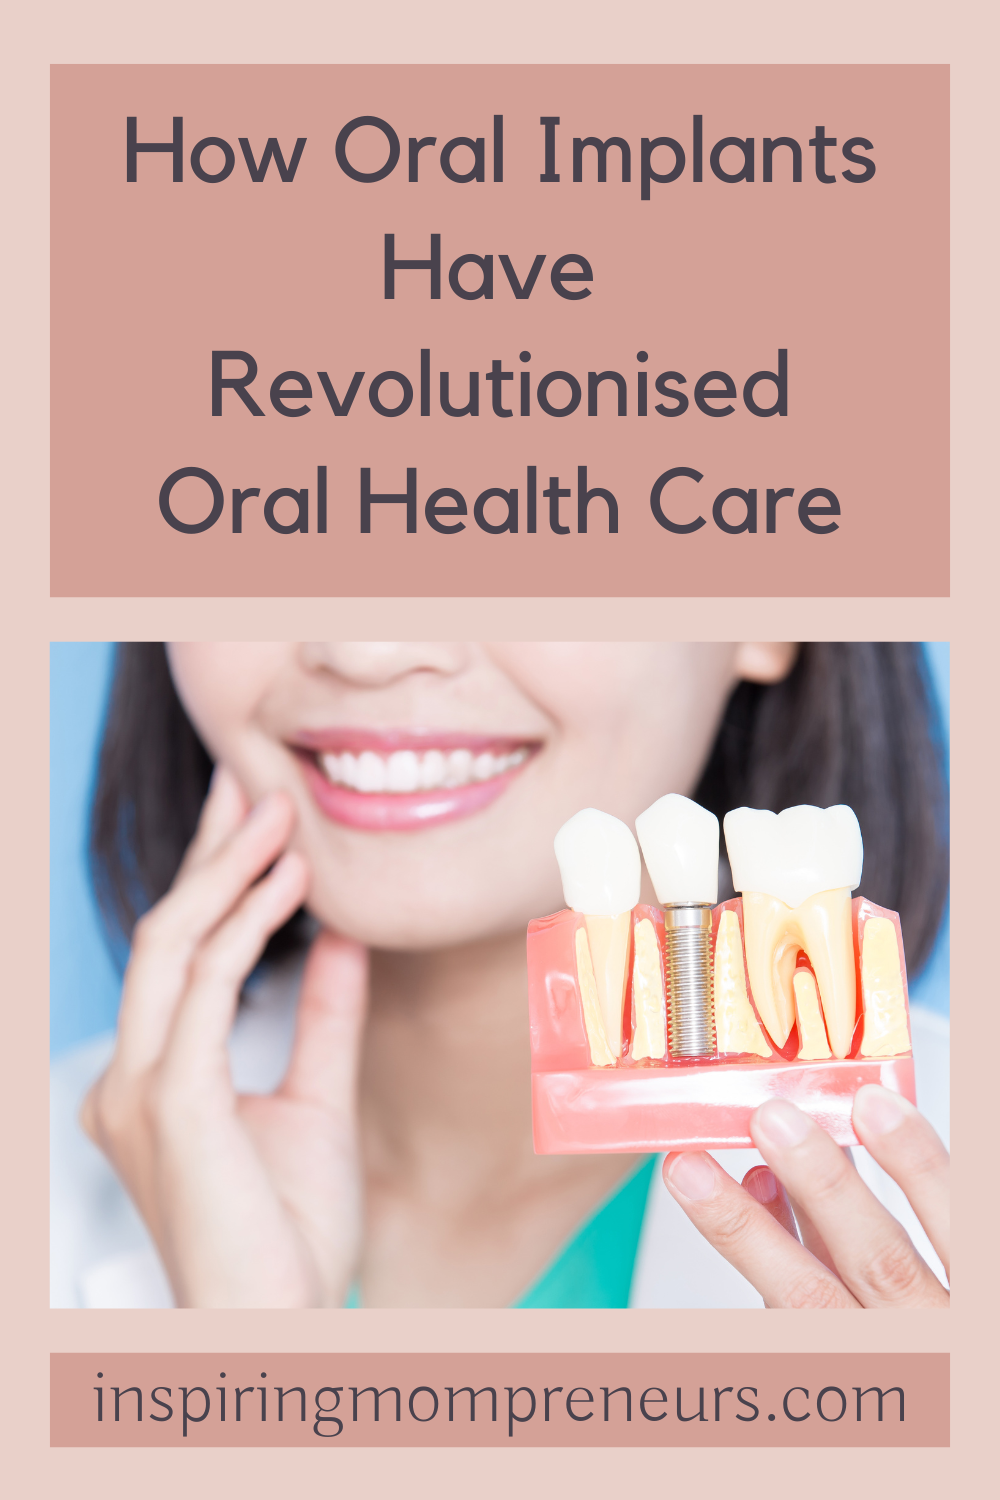 How Oral Implants Have Revolutionised Oral Health Care | Oral Implants pin